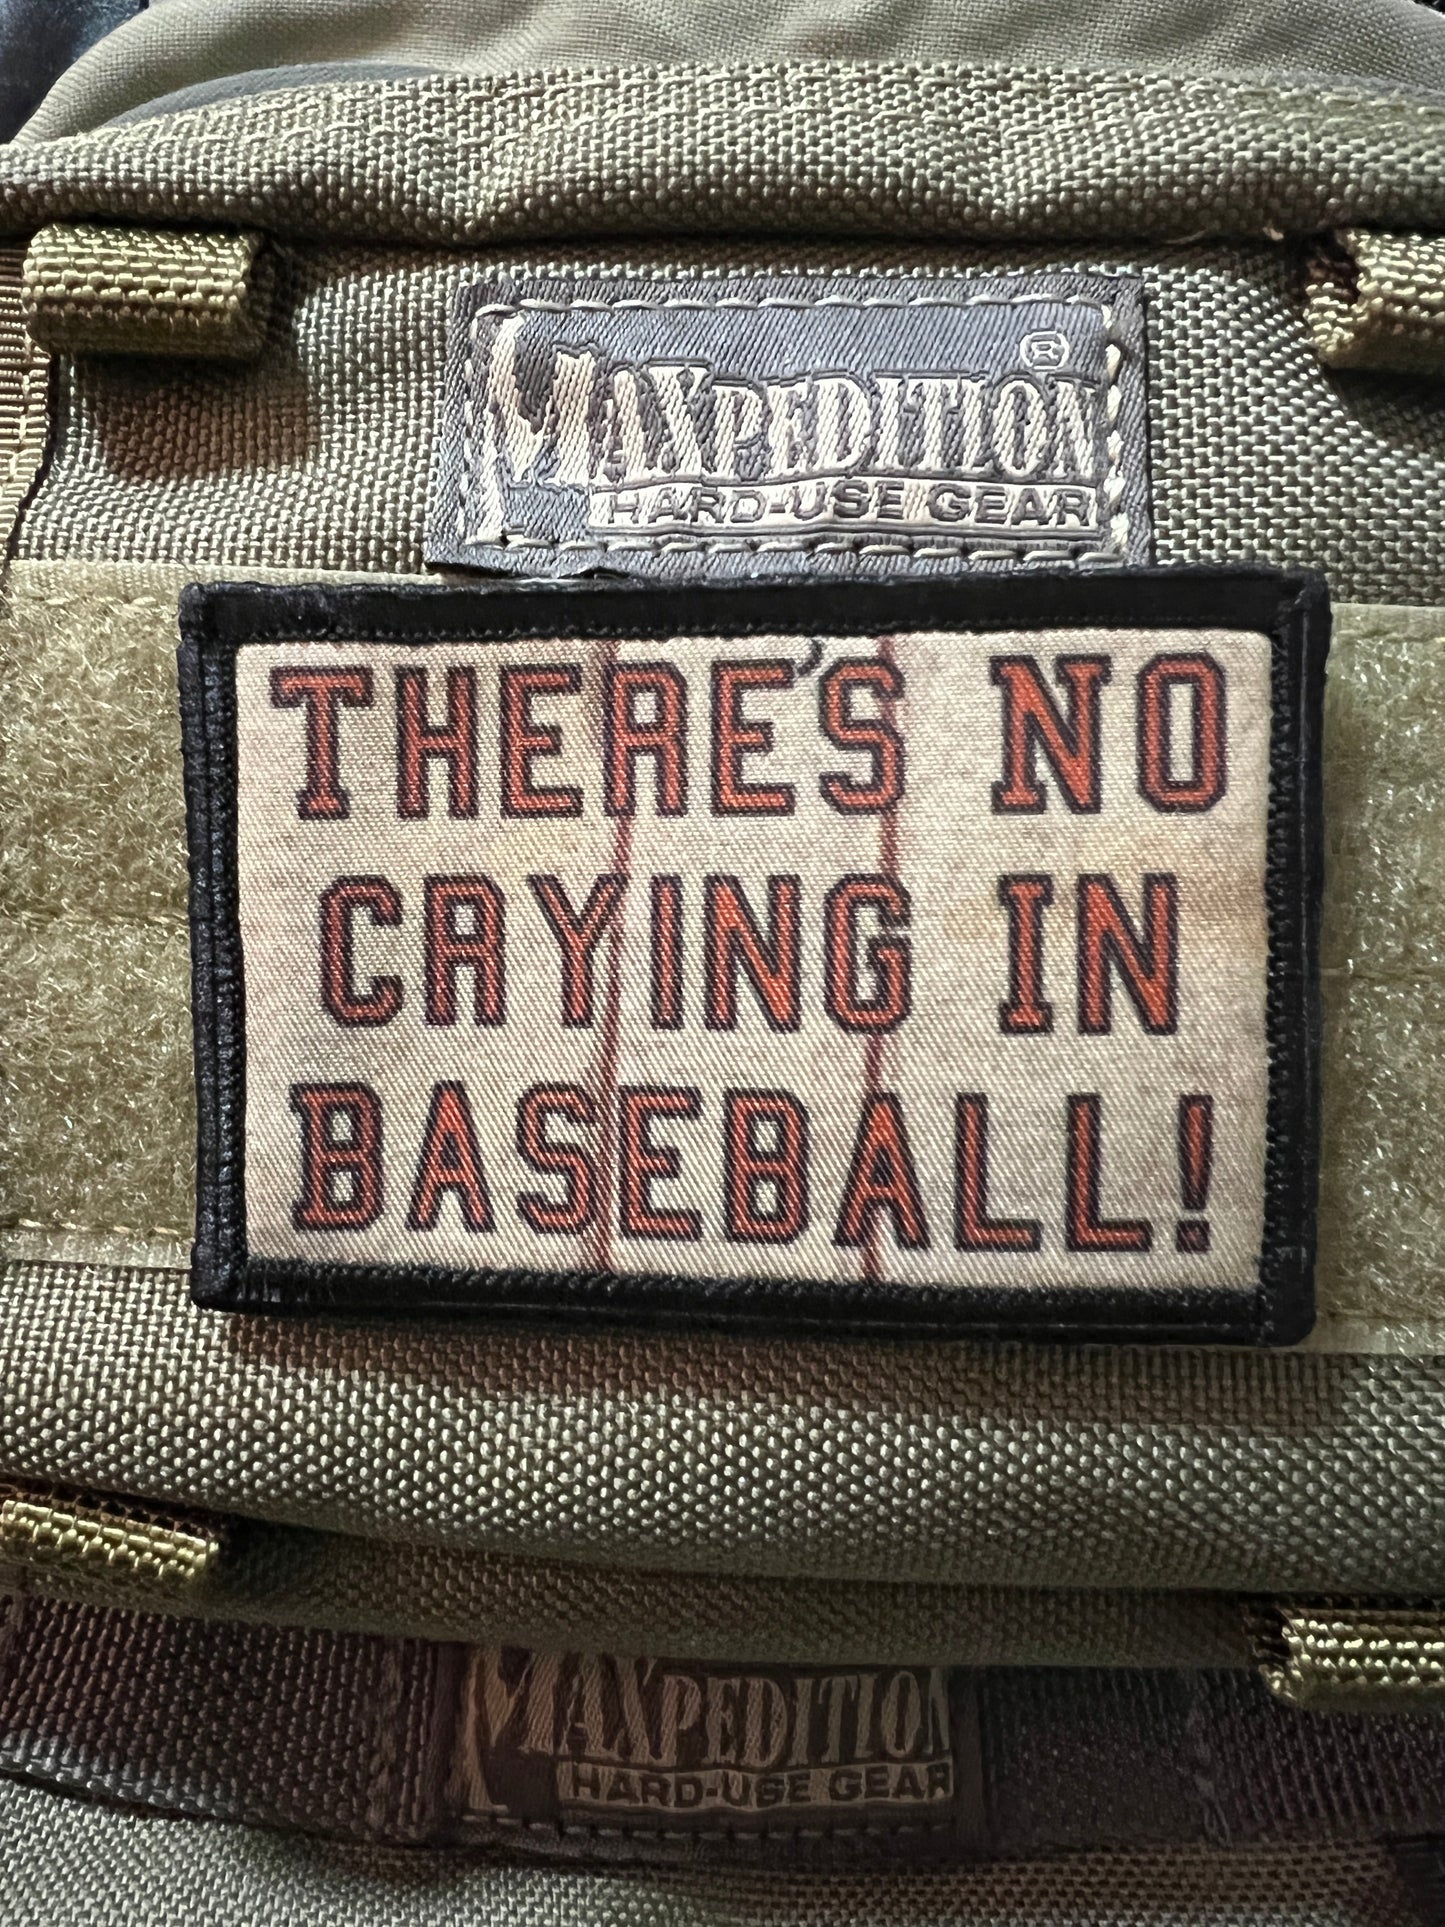 "There's no Crying in Baseball" A League of Their Own Morale Patch 2x3" Morale Patches Redheaded T Shirts 